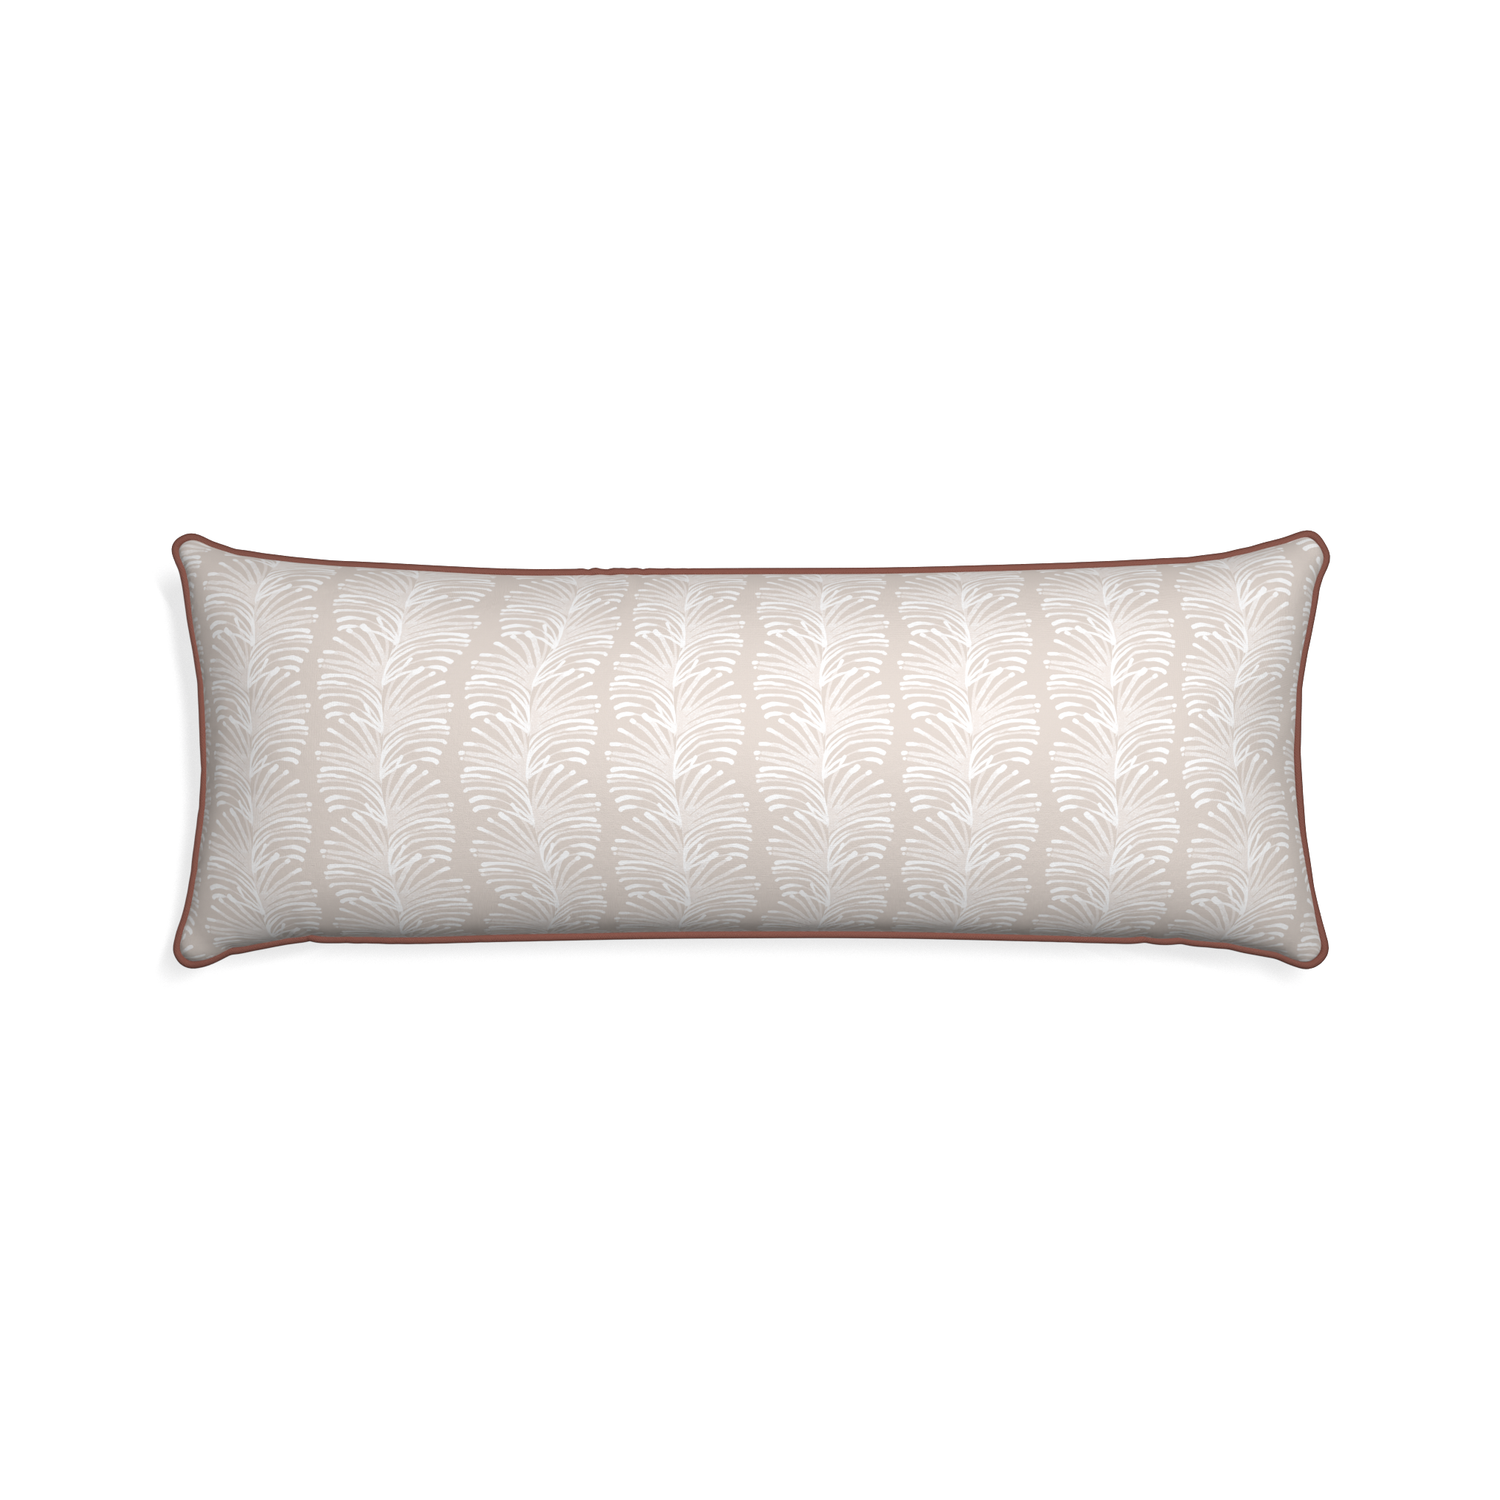 Xl-lumbar emma sand custom sand colored botanical stripepillow with w piping on white background